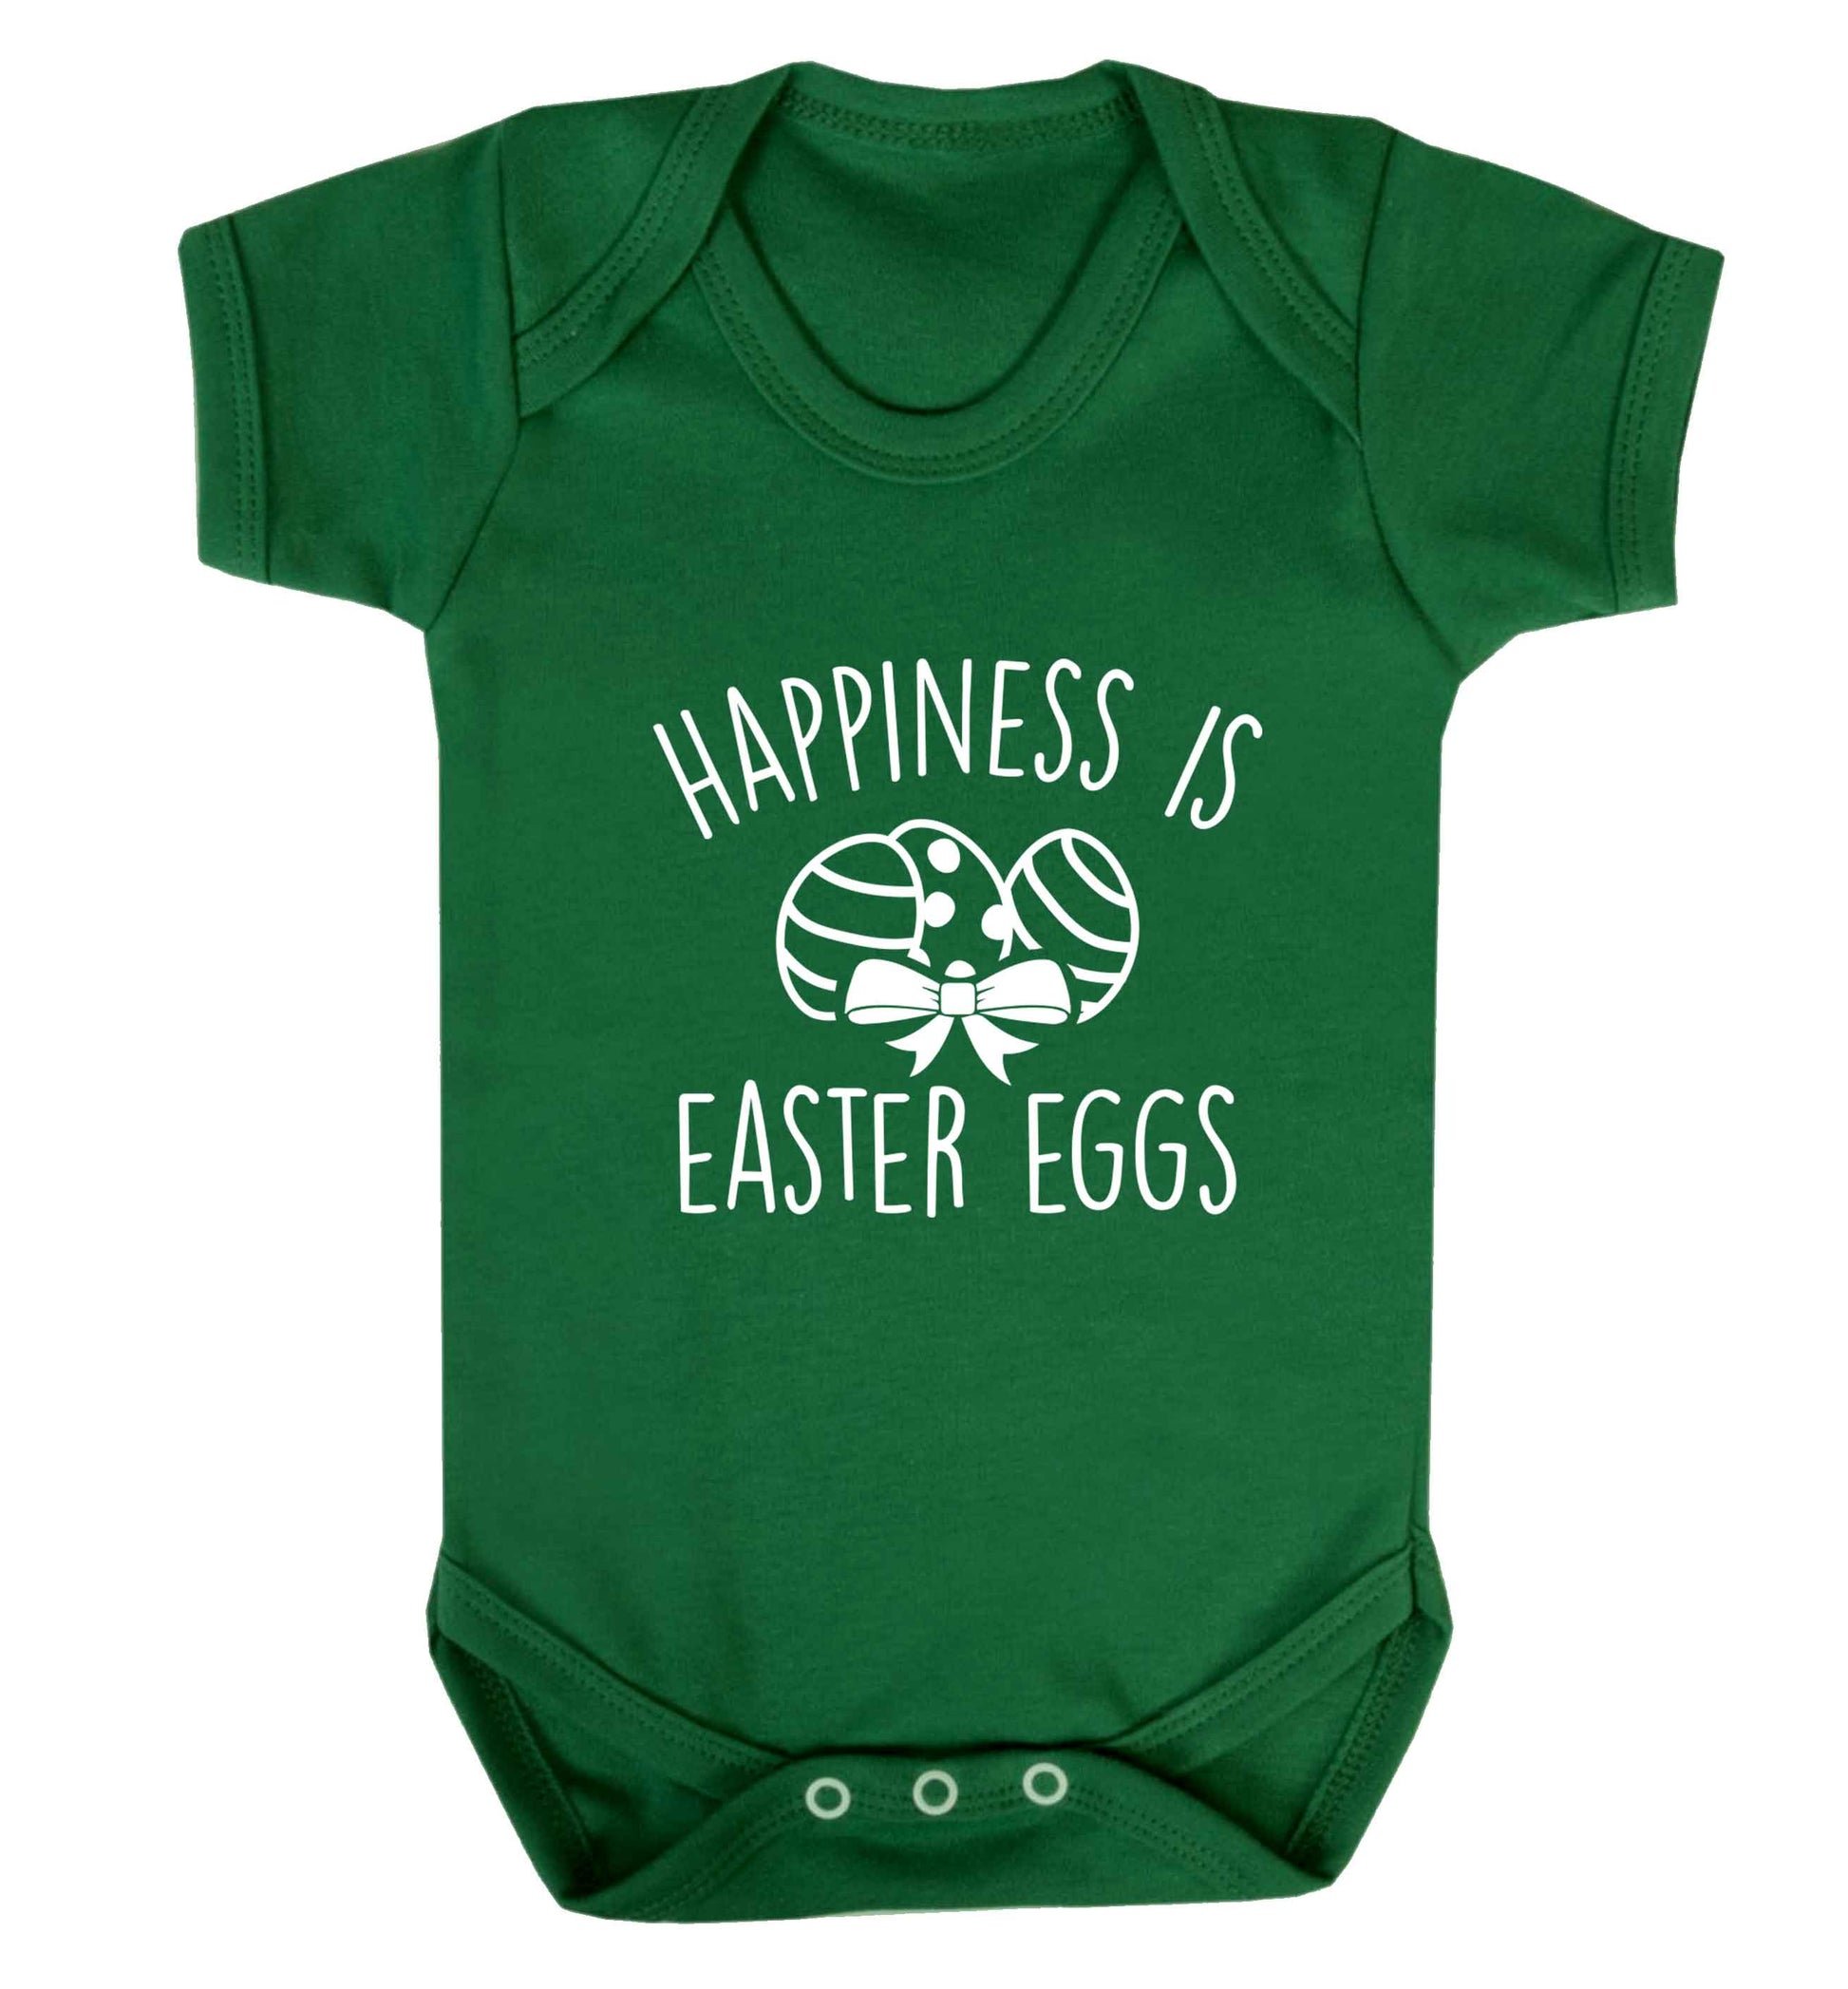 Happiness is Easter eggs baby vest green 18-24 months